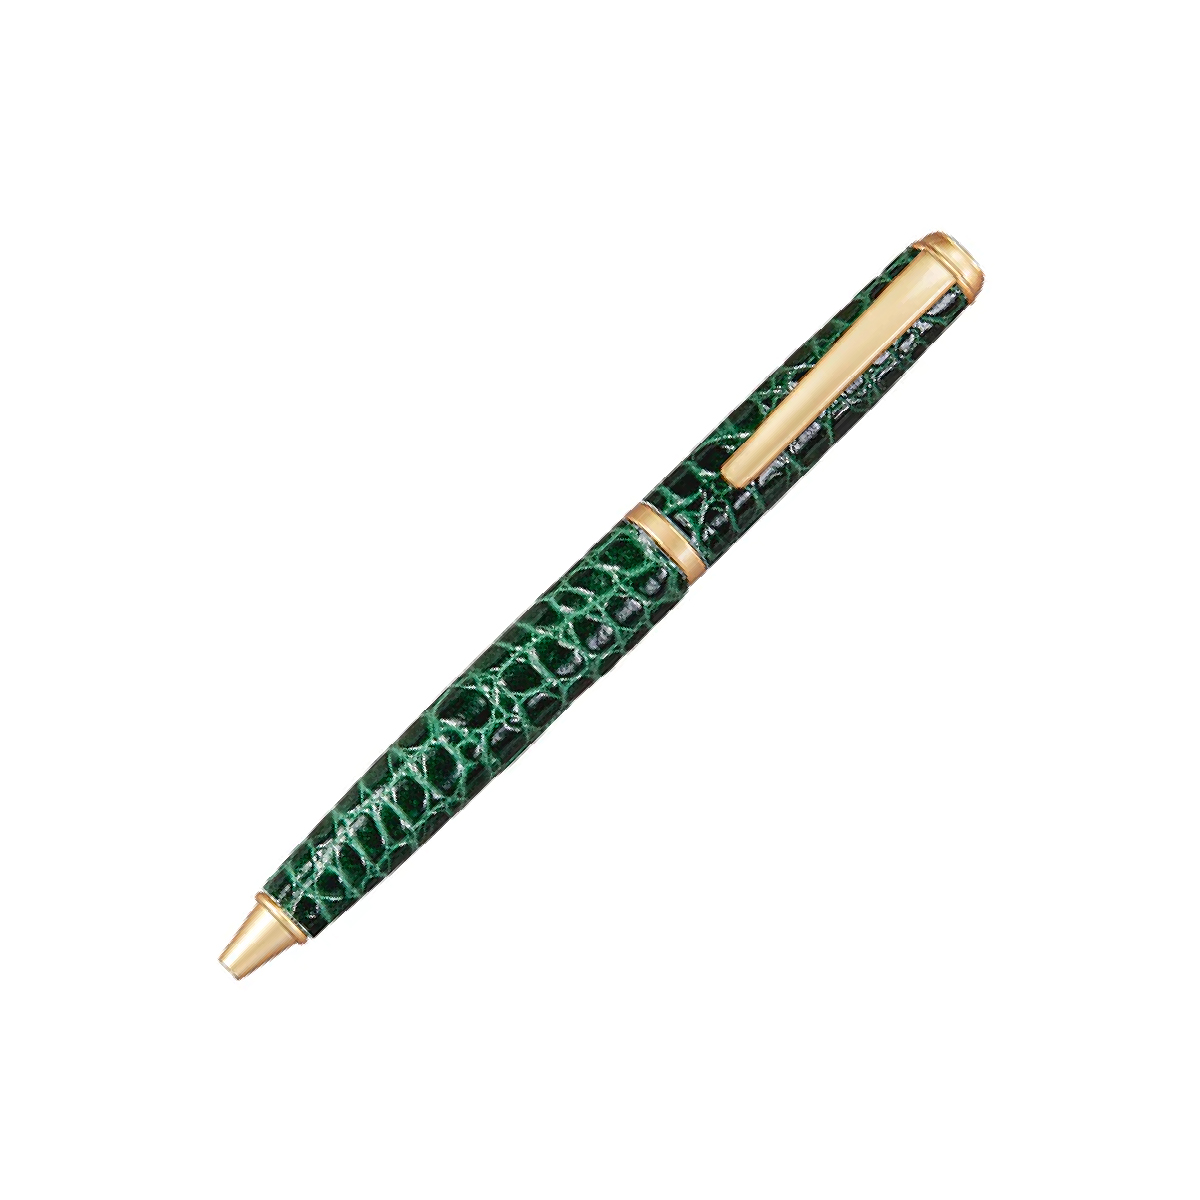 Graphic Image - Emerald Green Crocodile Leather Wrapped Pen